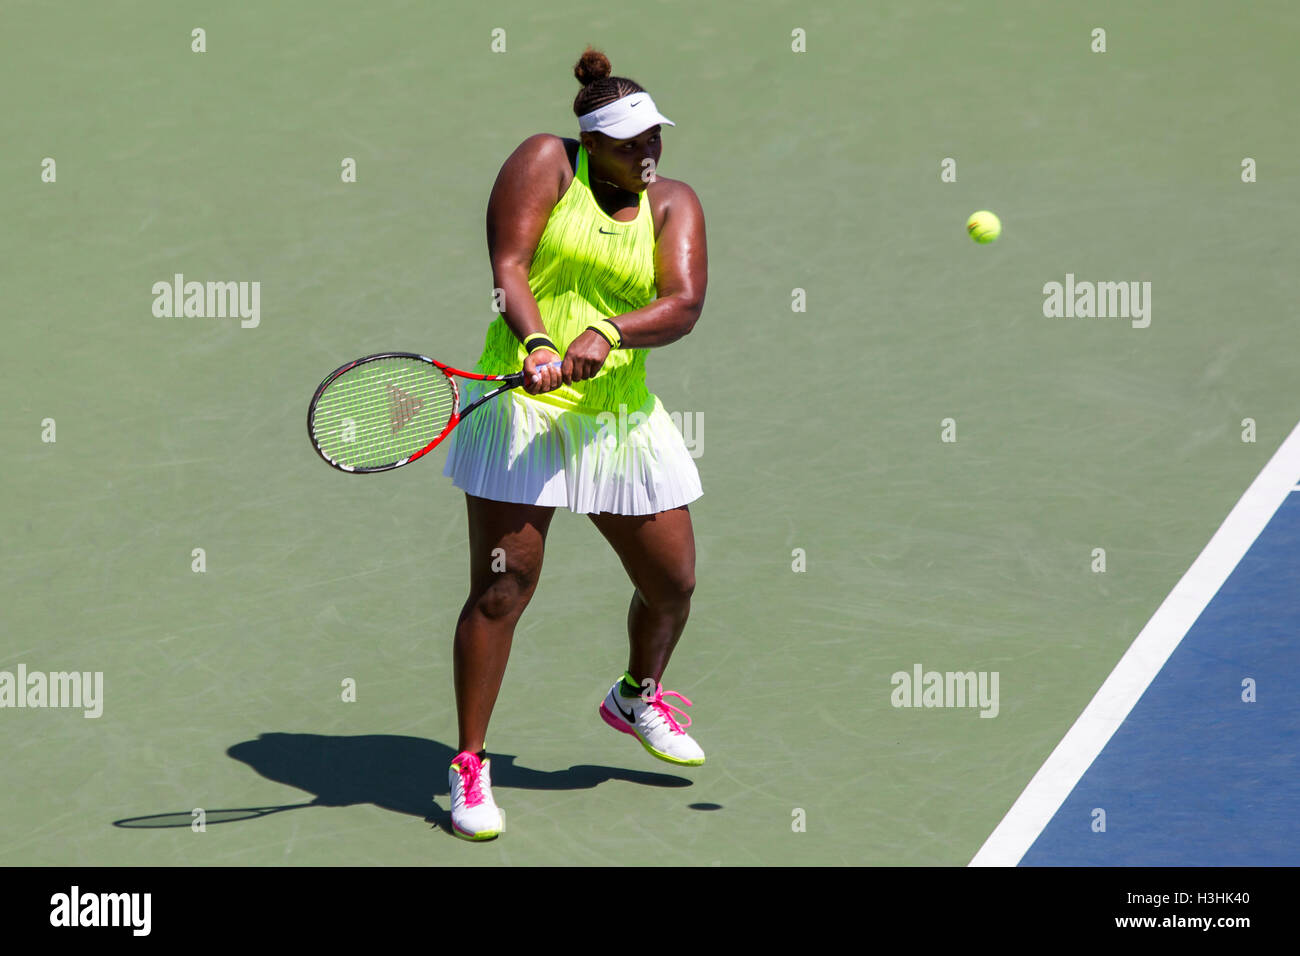 Taylor Townsend (USA) competere nel 2016 US Open Foto Stock